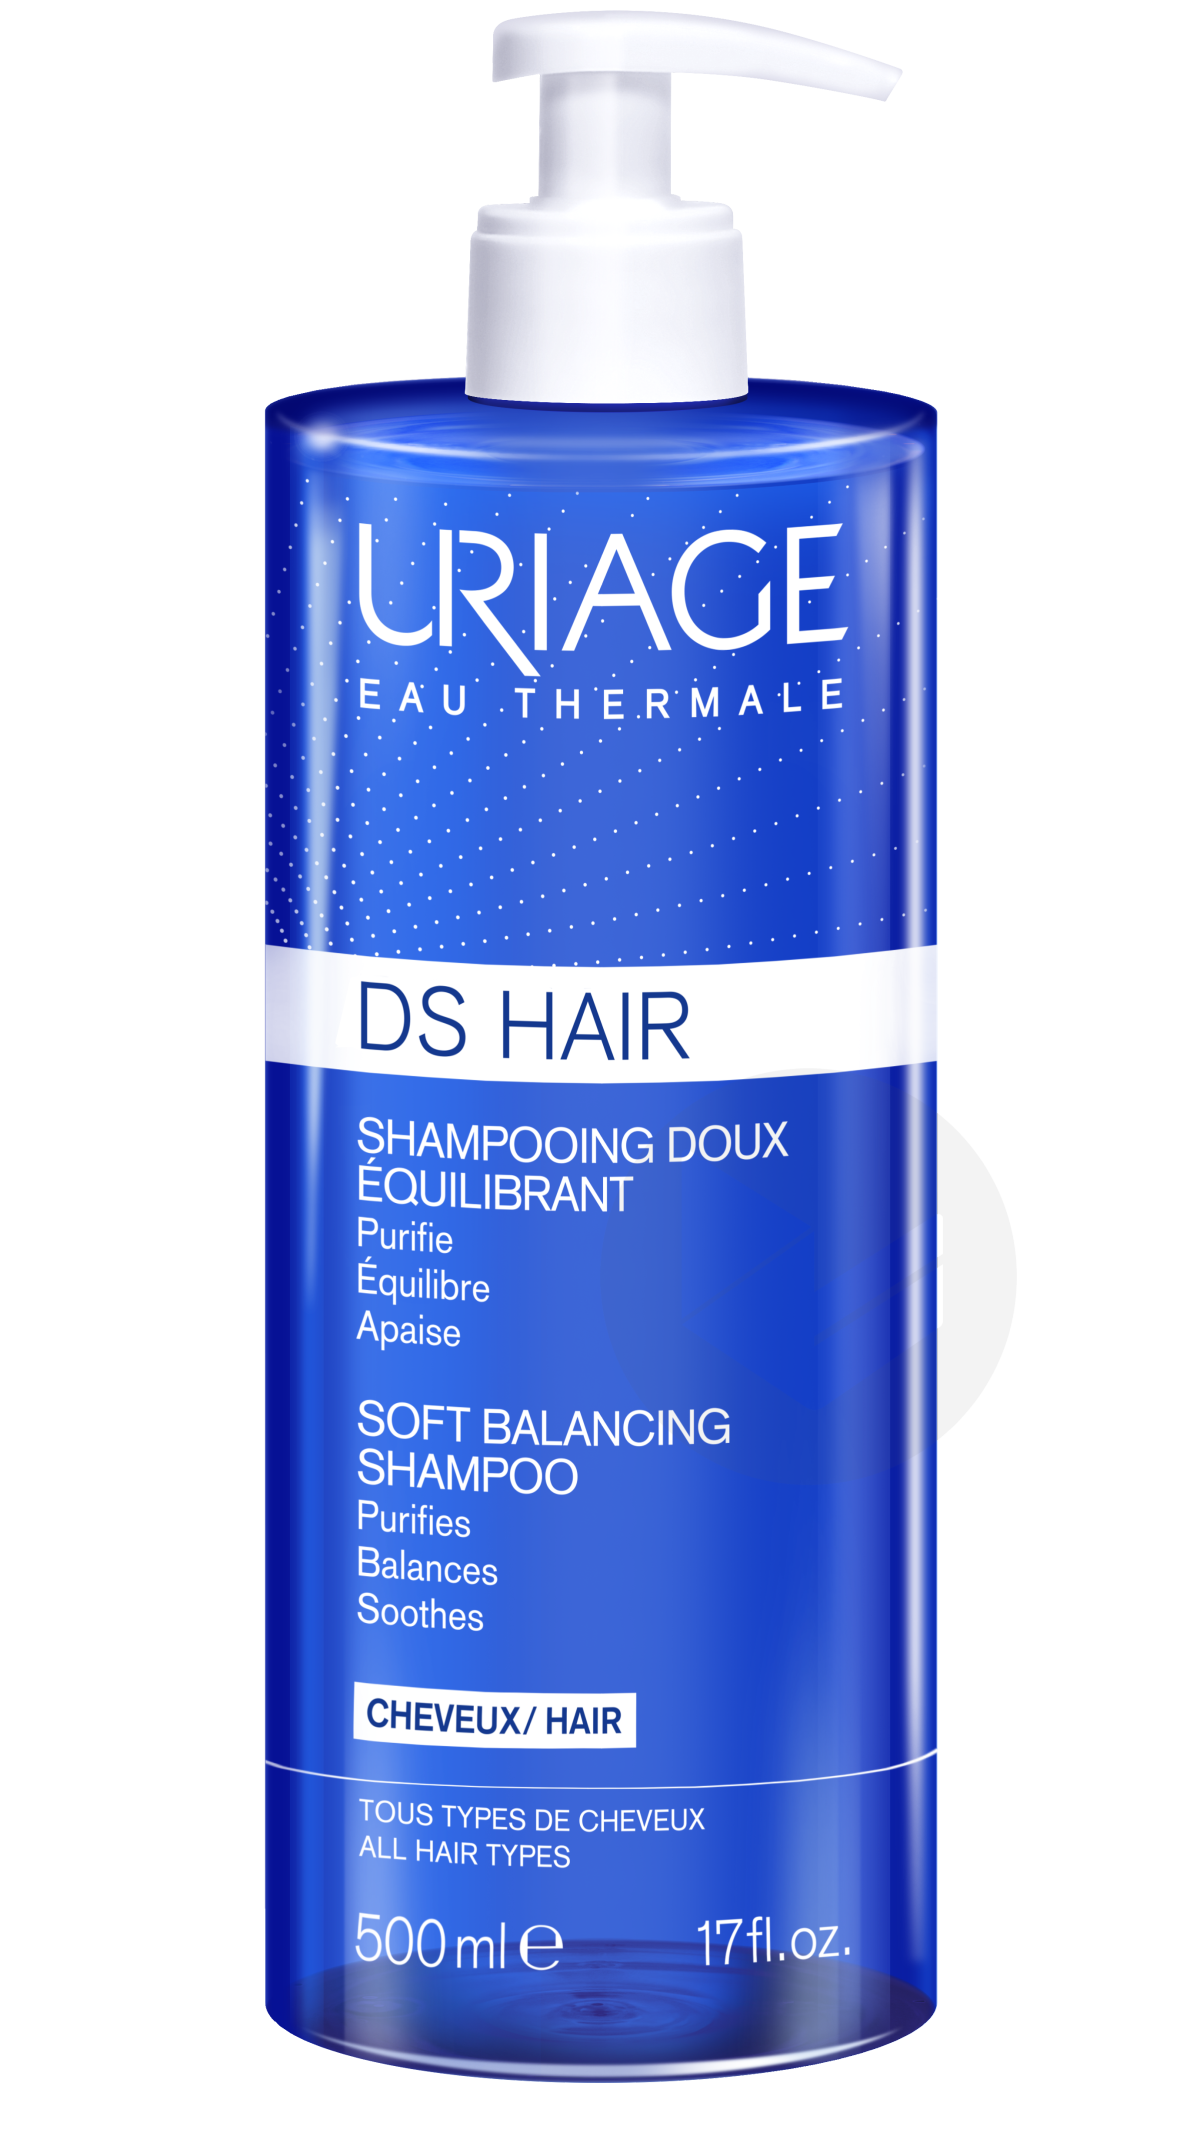 DS HAIR Shampooing doux équilibrant 500ml